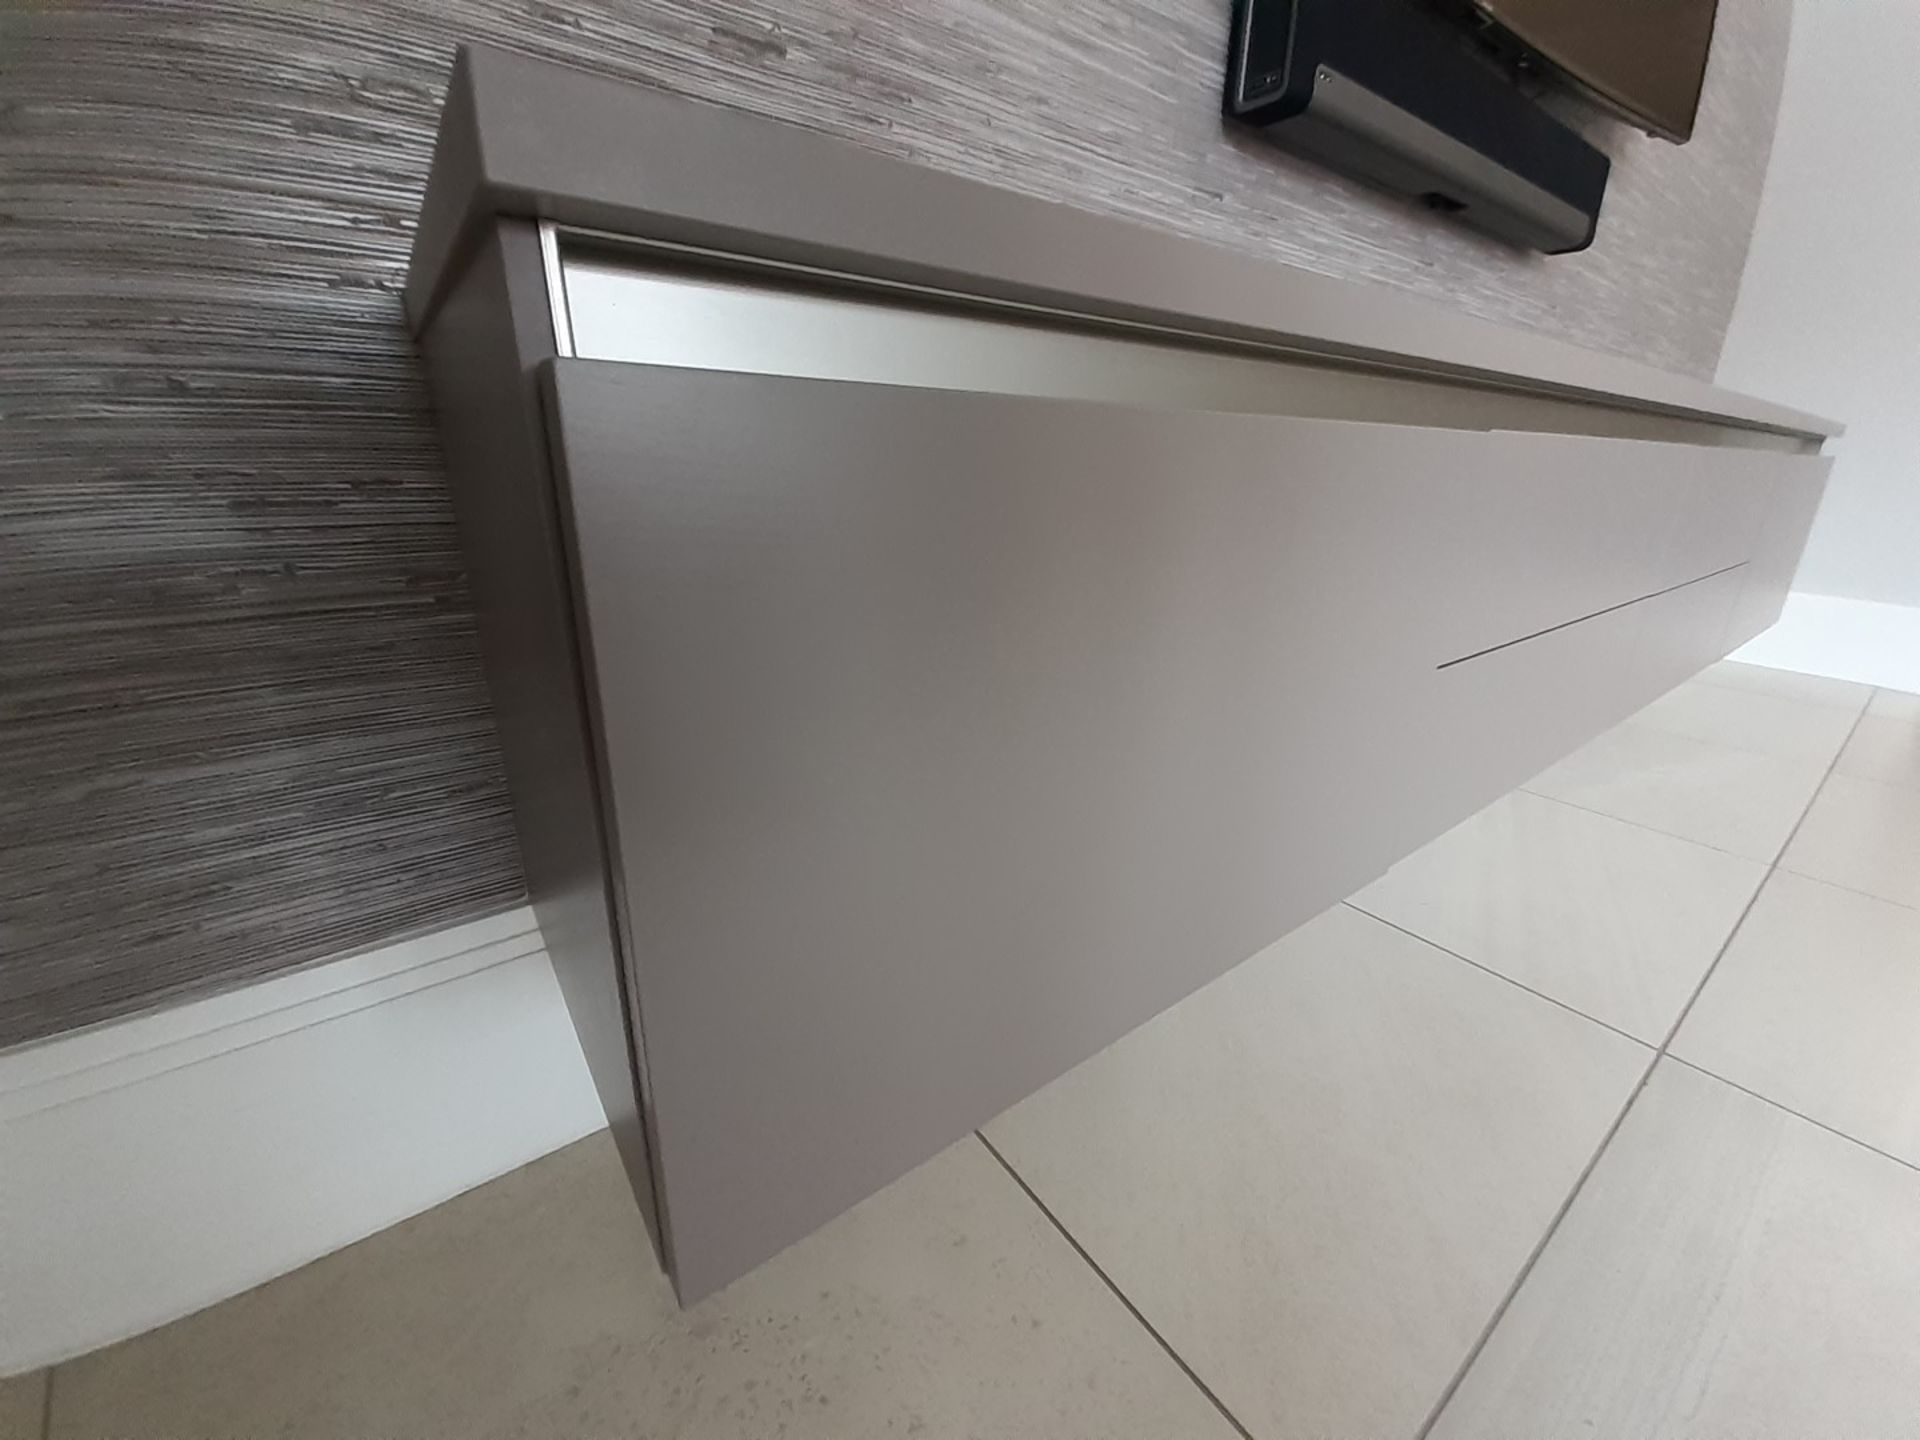 1 x SieMatic Handleless Fitted Kitchen With Intergrated NEFF Appliances, Corian Worktops And Island - Image 49 of 92